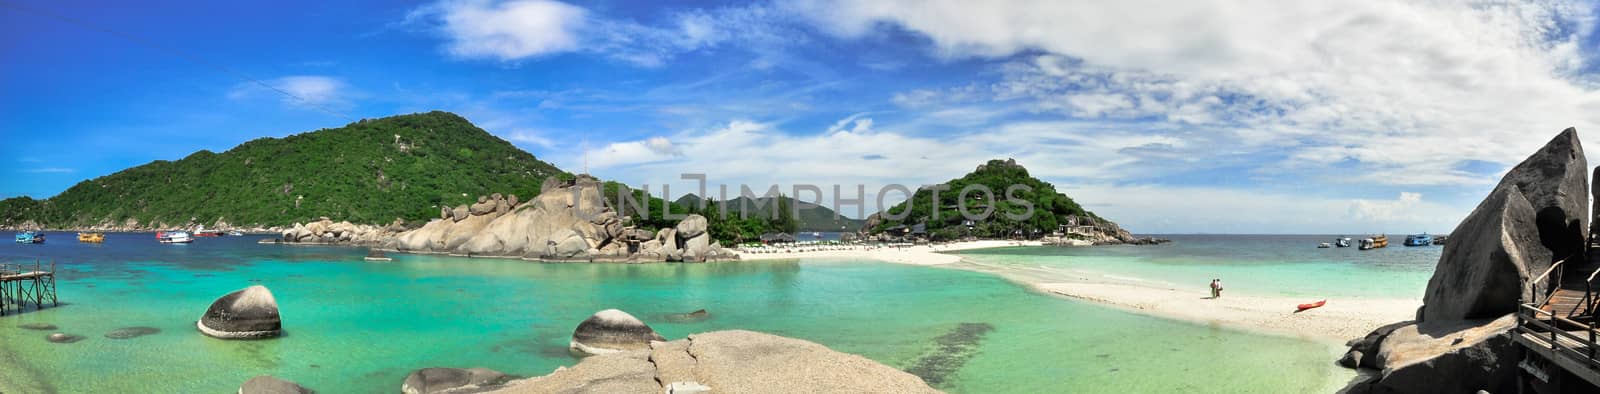 Koh Tao Panorama - a paradise island in Thailand. by weltreisendertj